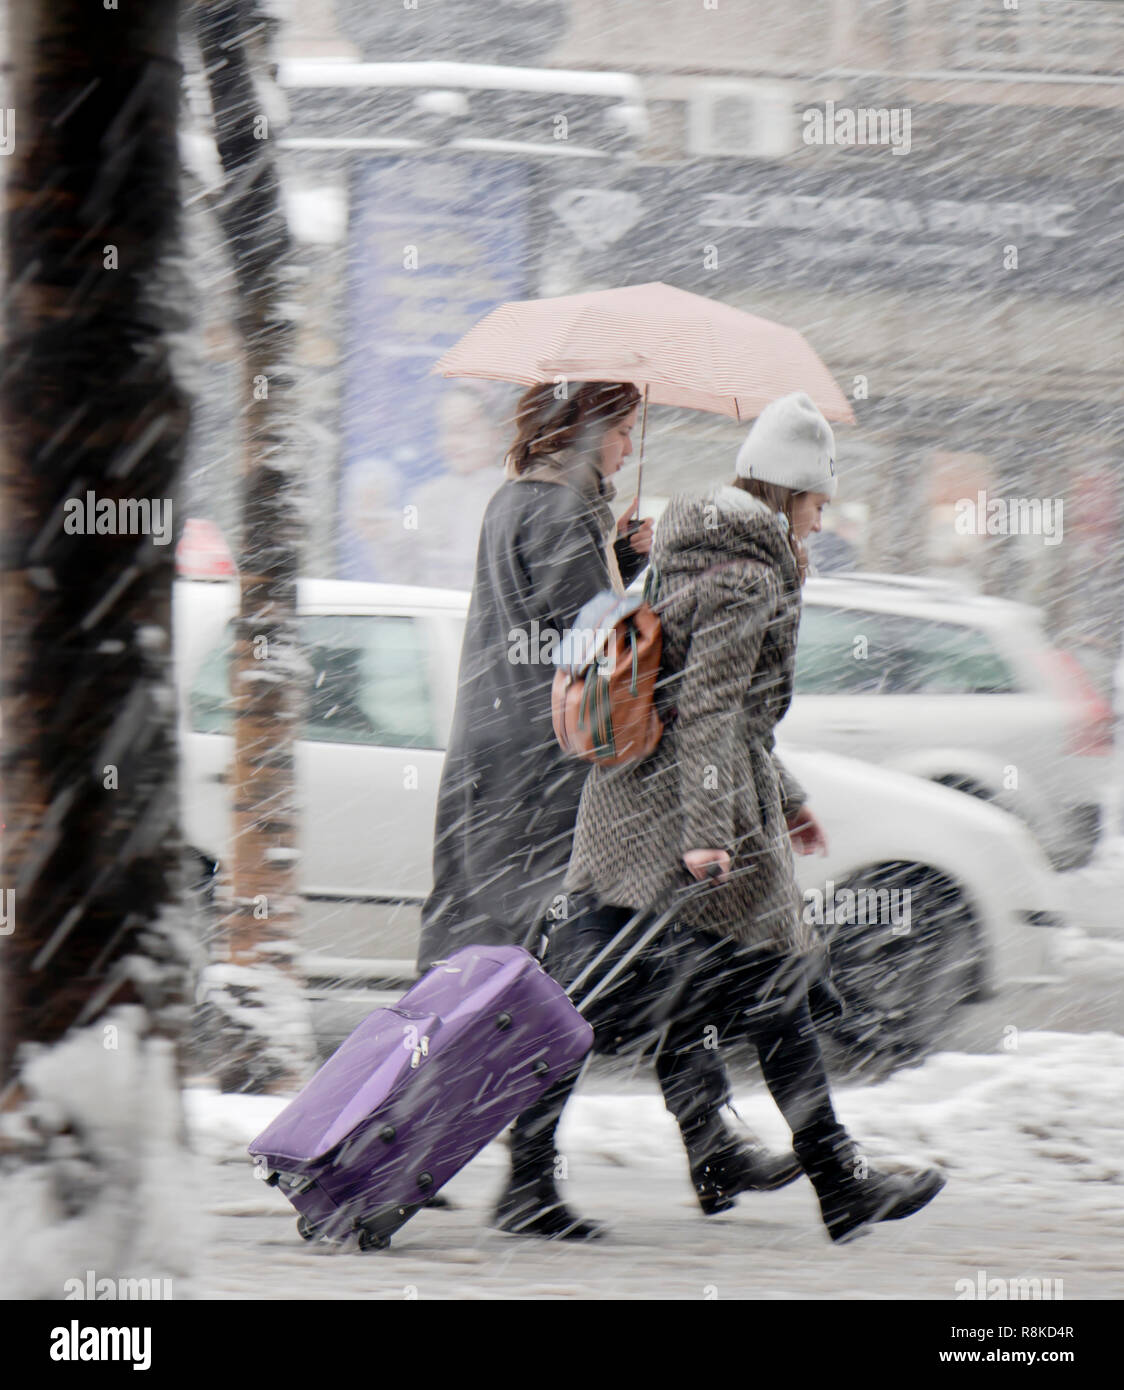 Belgrade, Serbia - December 15, 2018: Two teenage girls walking under umbrella in heavy snowfall in city street and one is rolling a wheeled suitcase  Stock Photo